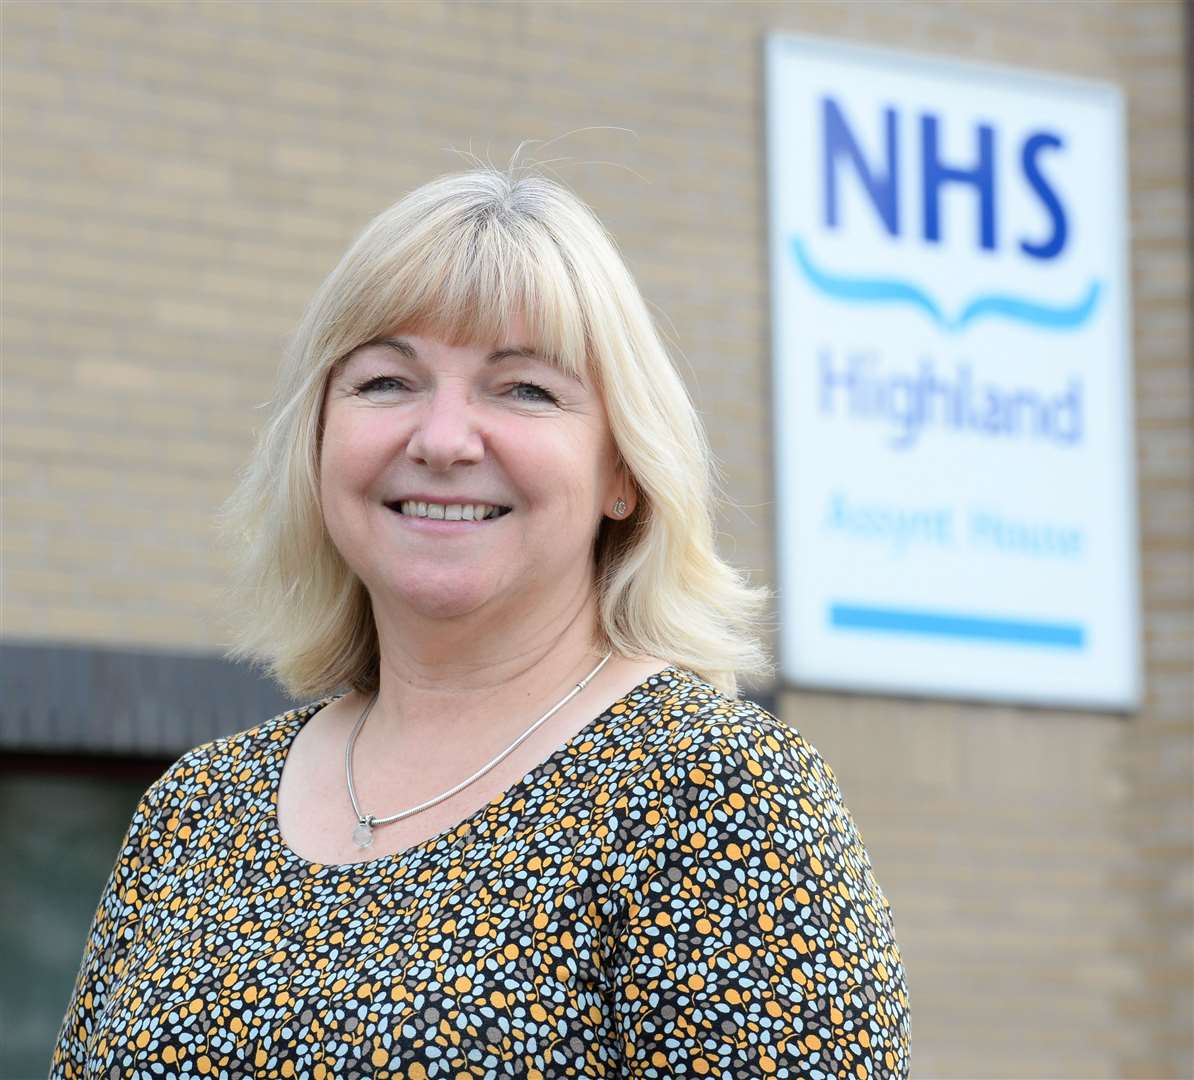 NHS Highland chief executive Pam Dudek has been asked to respond publicly to questions over health services in Caithness. Picture: Gary Anthony